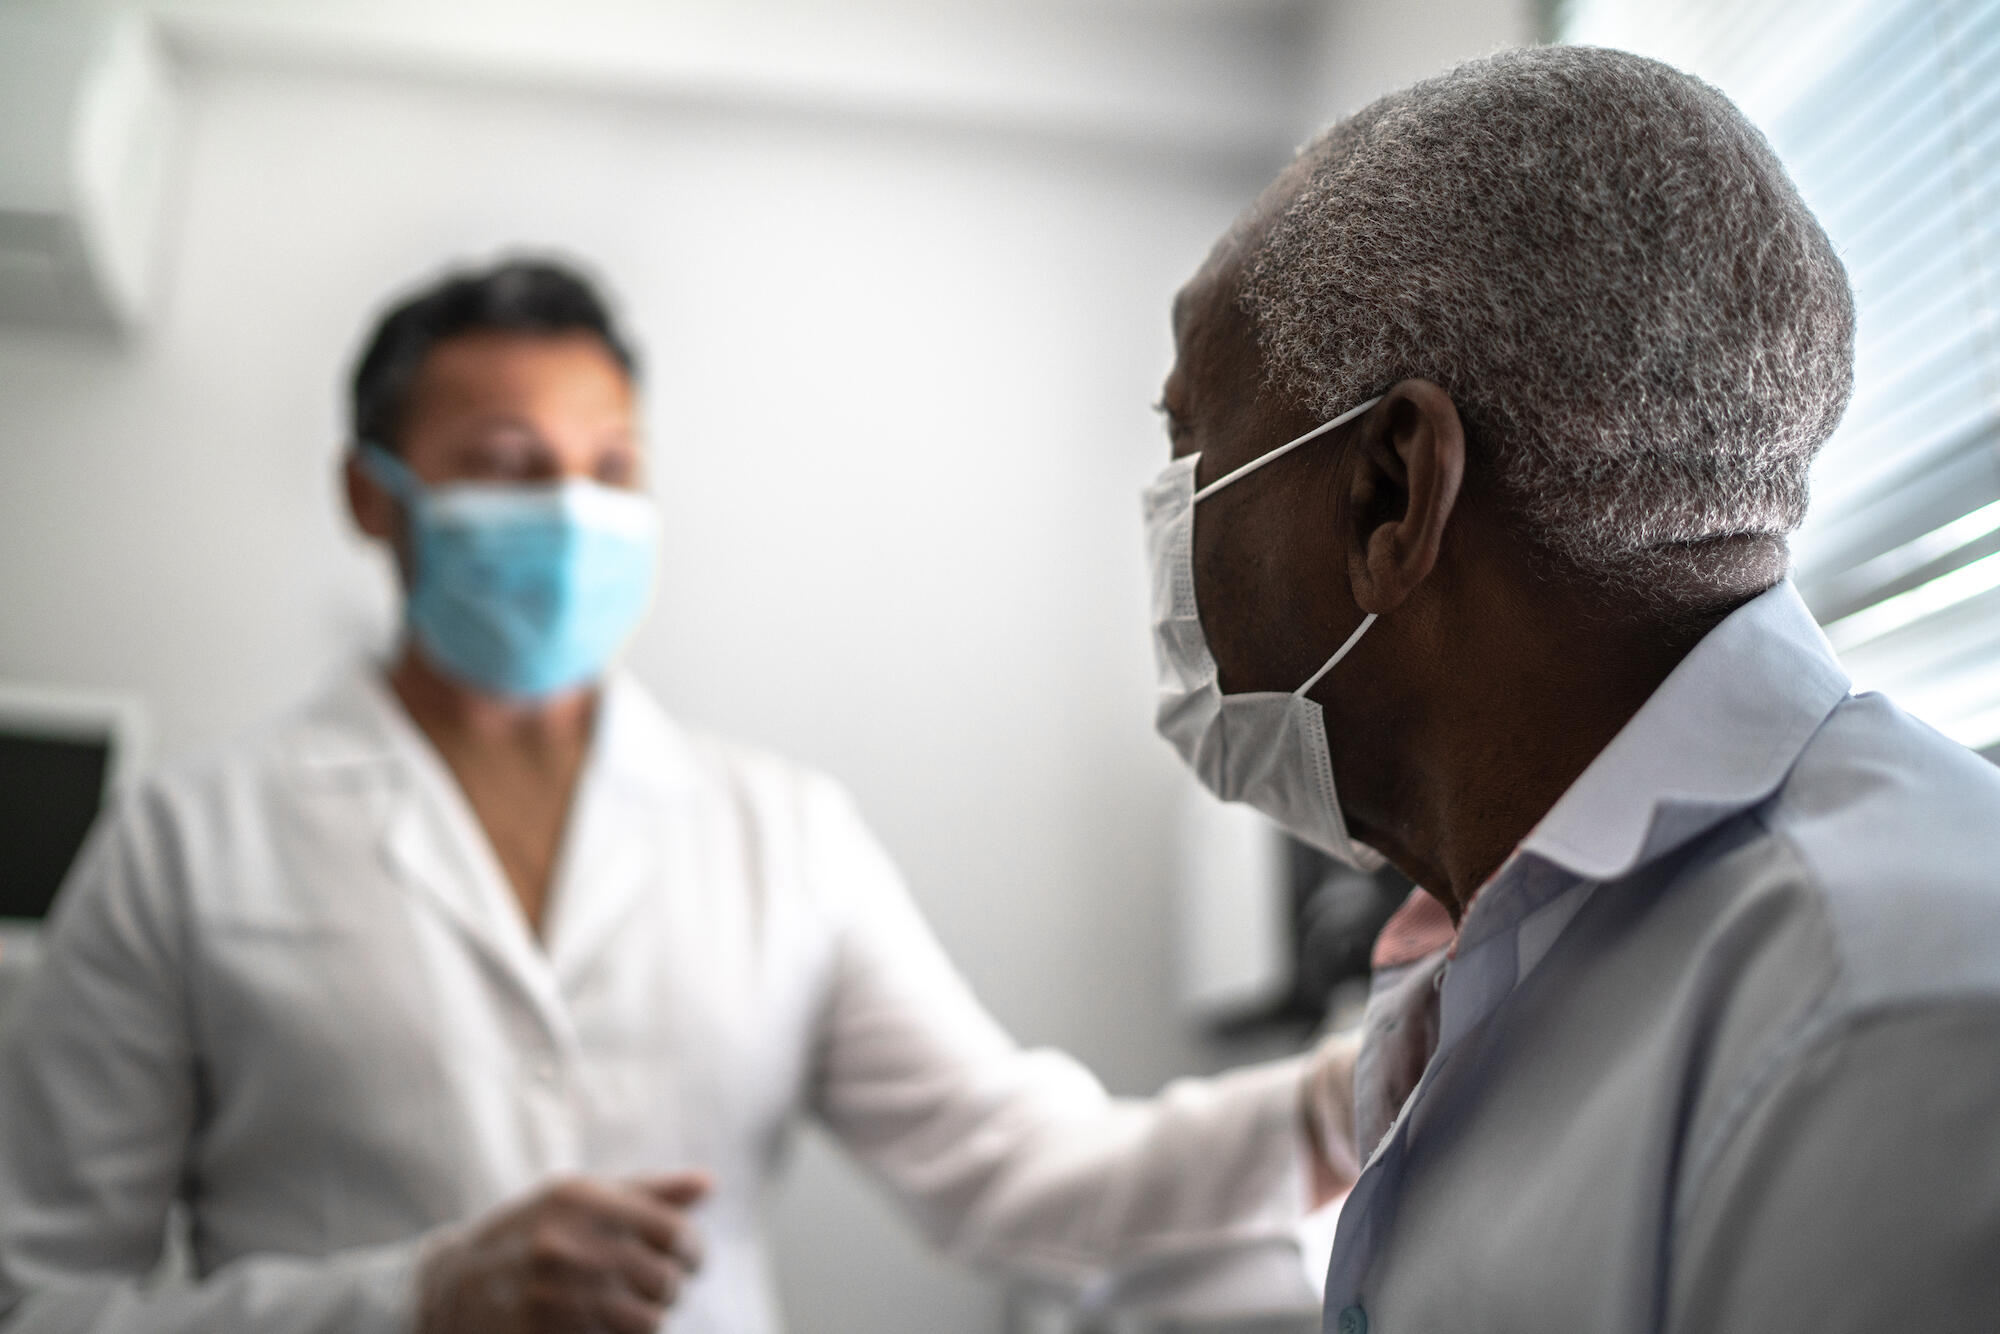 Black man wearing a mask at the doctor's office